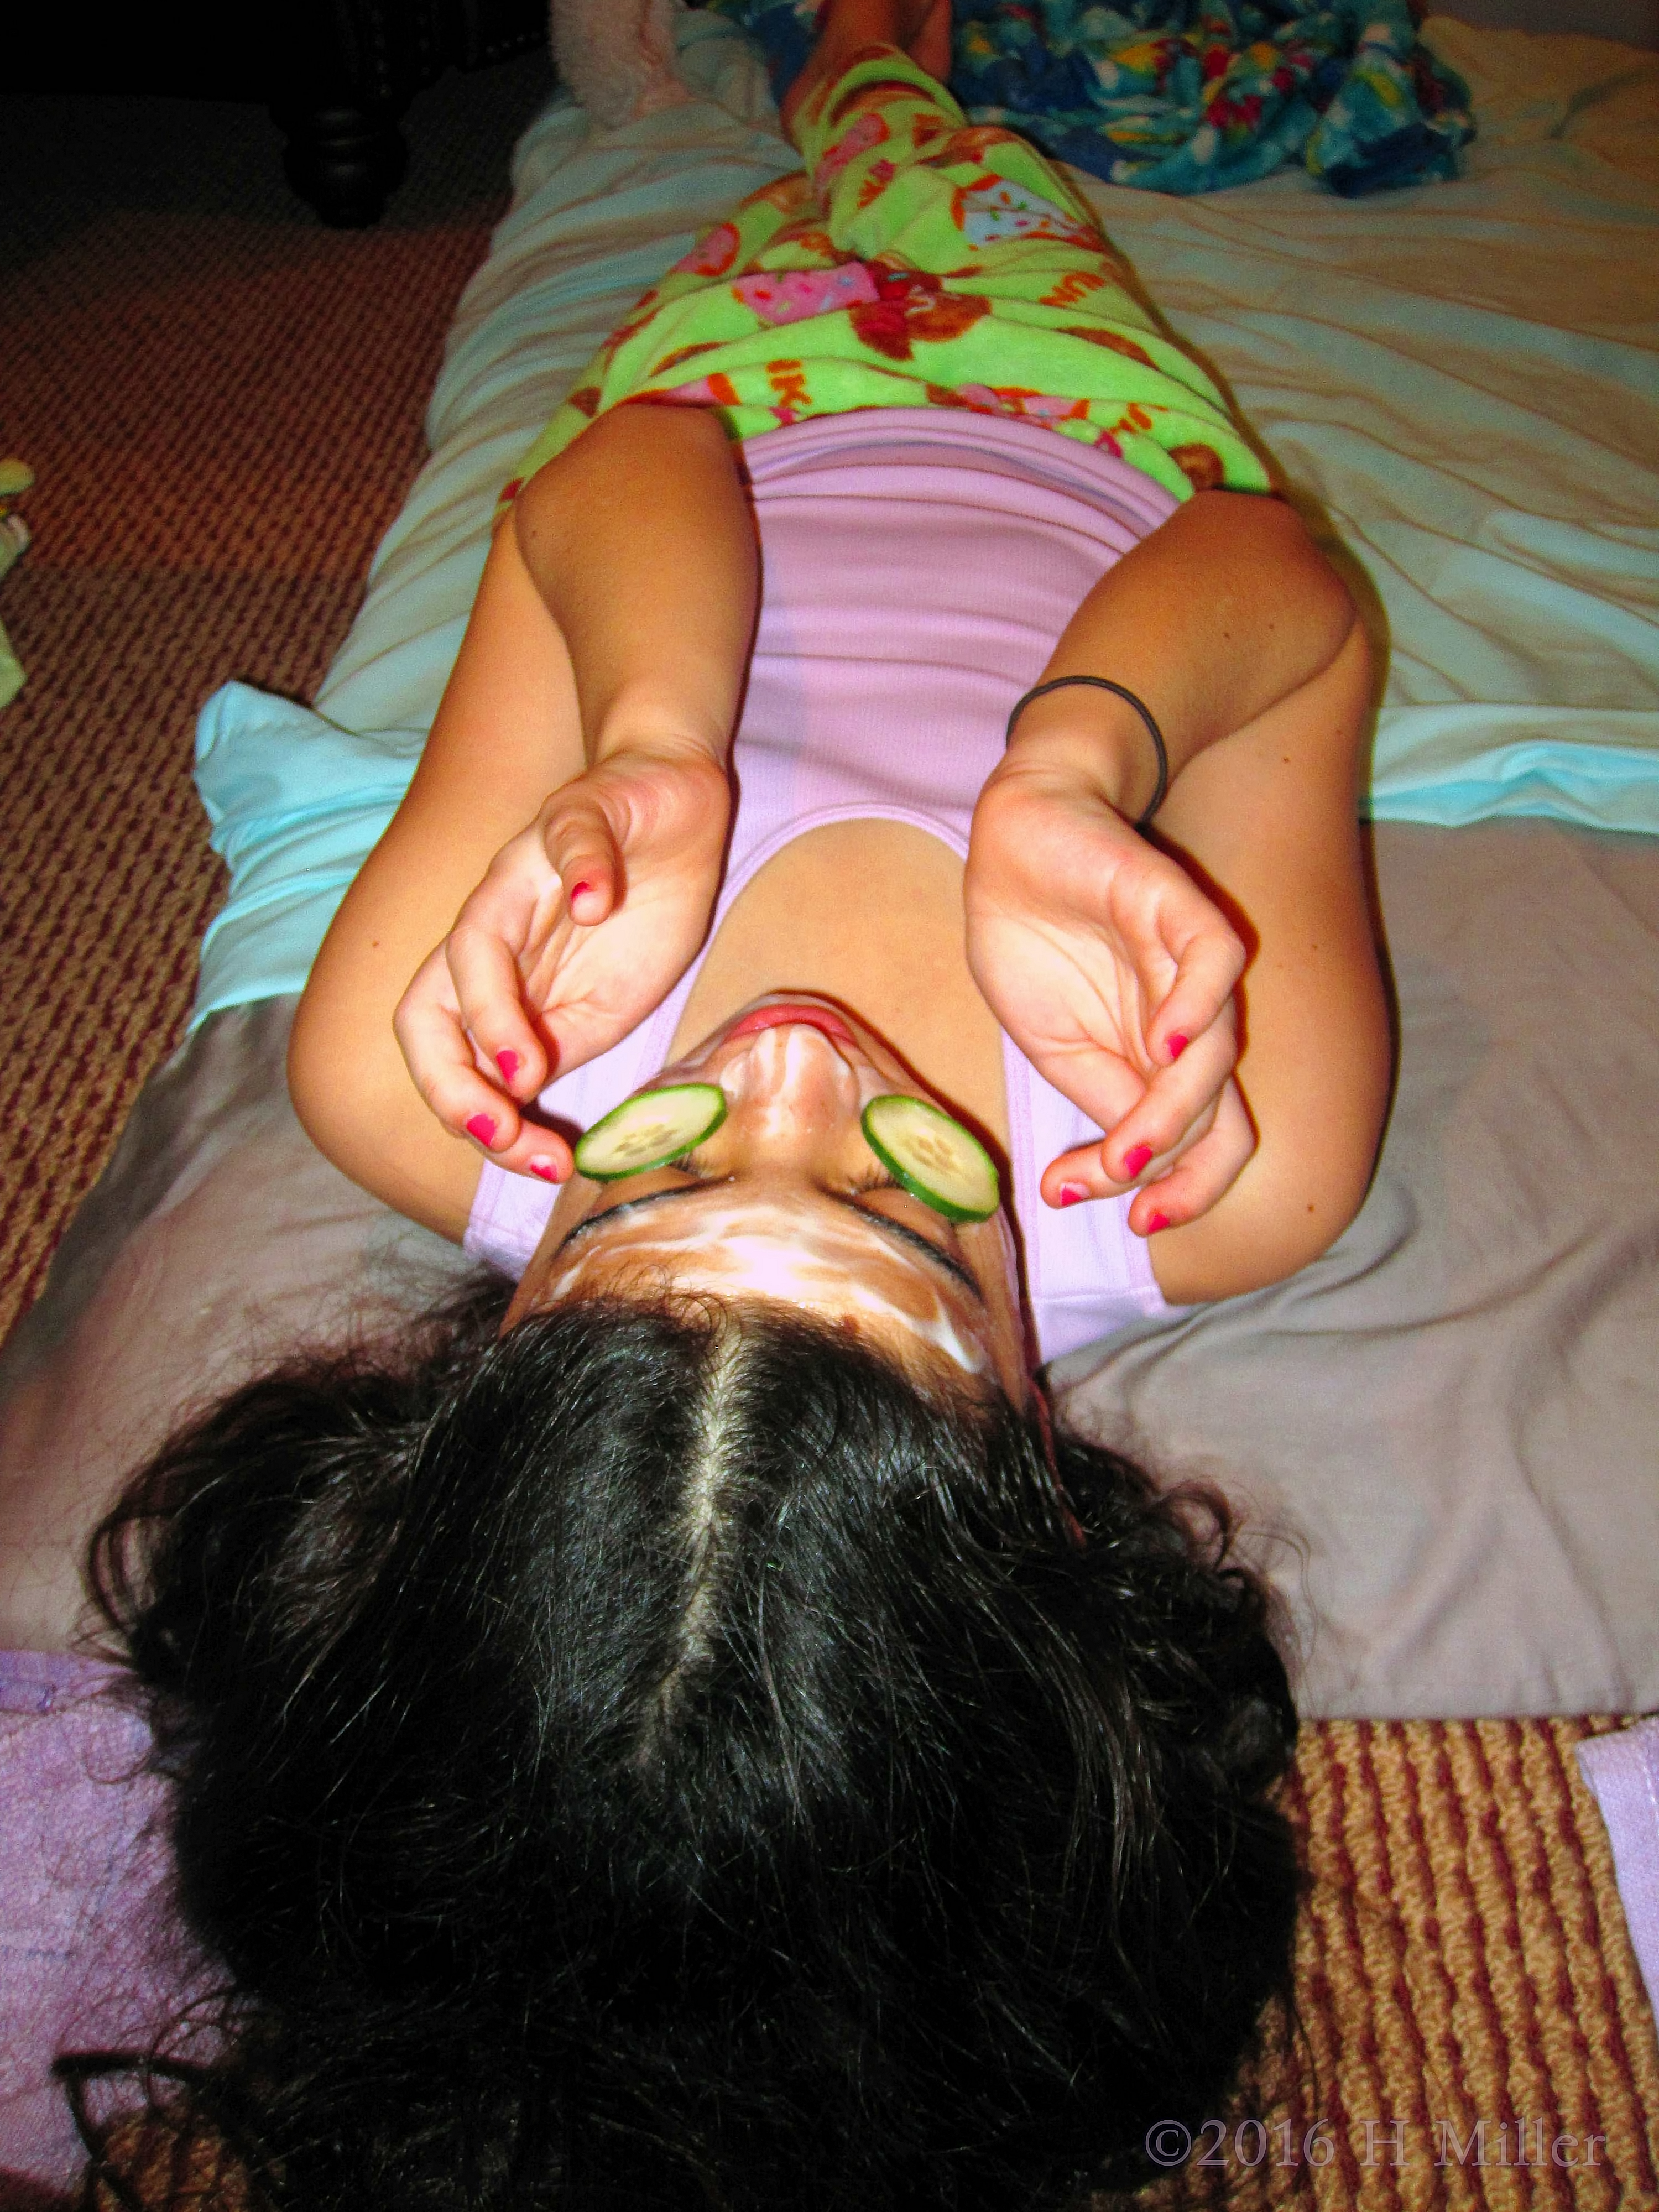 Placing The Cukes Over The Eyes During Her Girls Facial! 